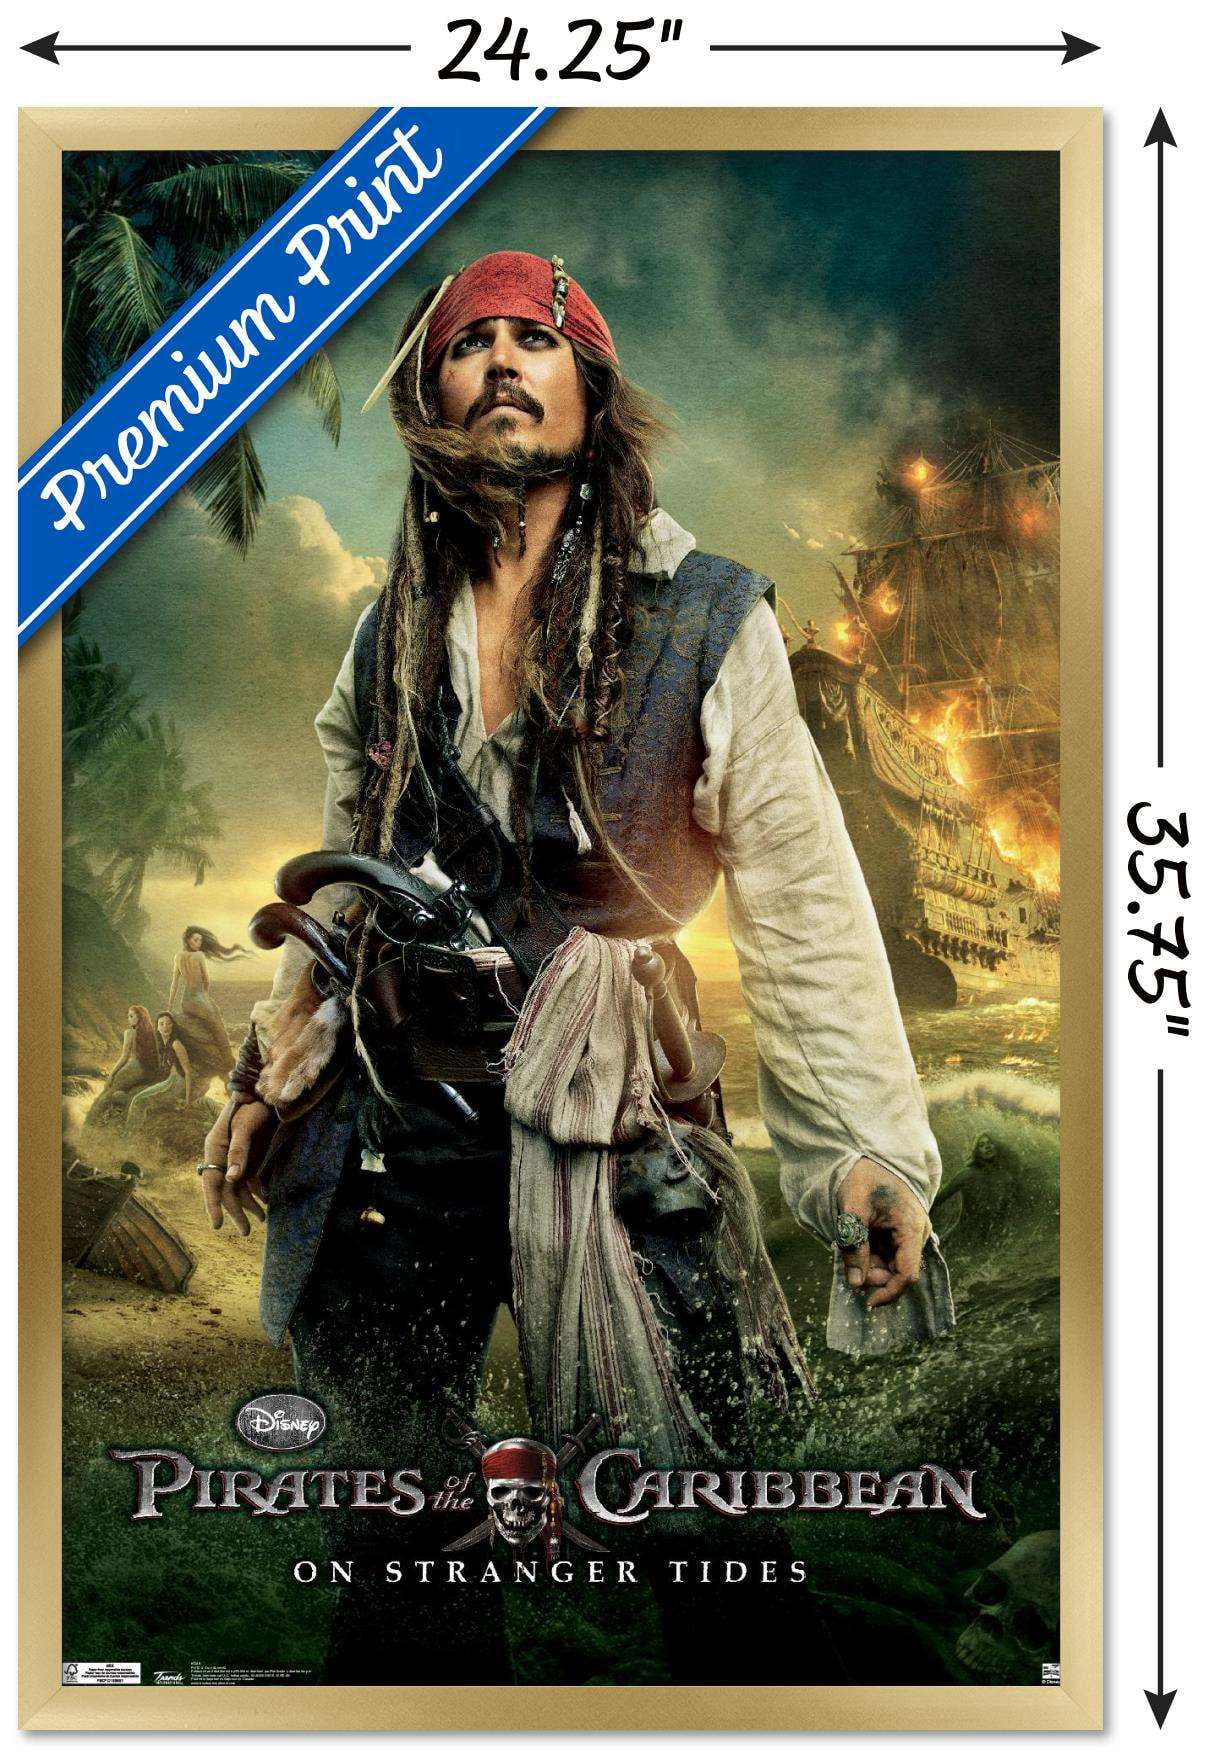 Disney Pirates of the Caribbean: On Stranger Tides - One Sheet 2 Wall  Poster, 